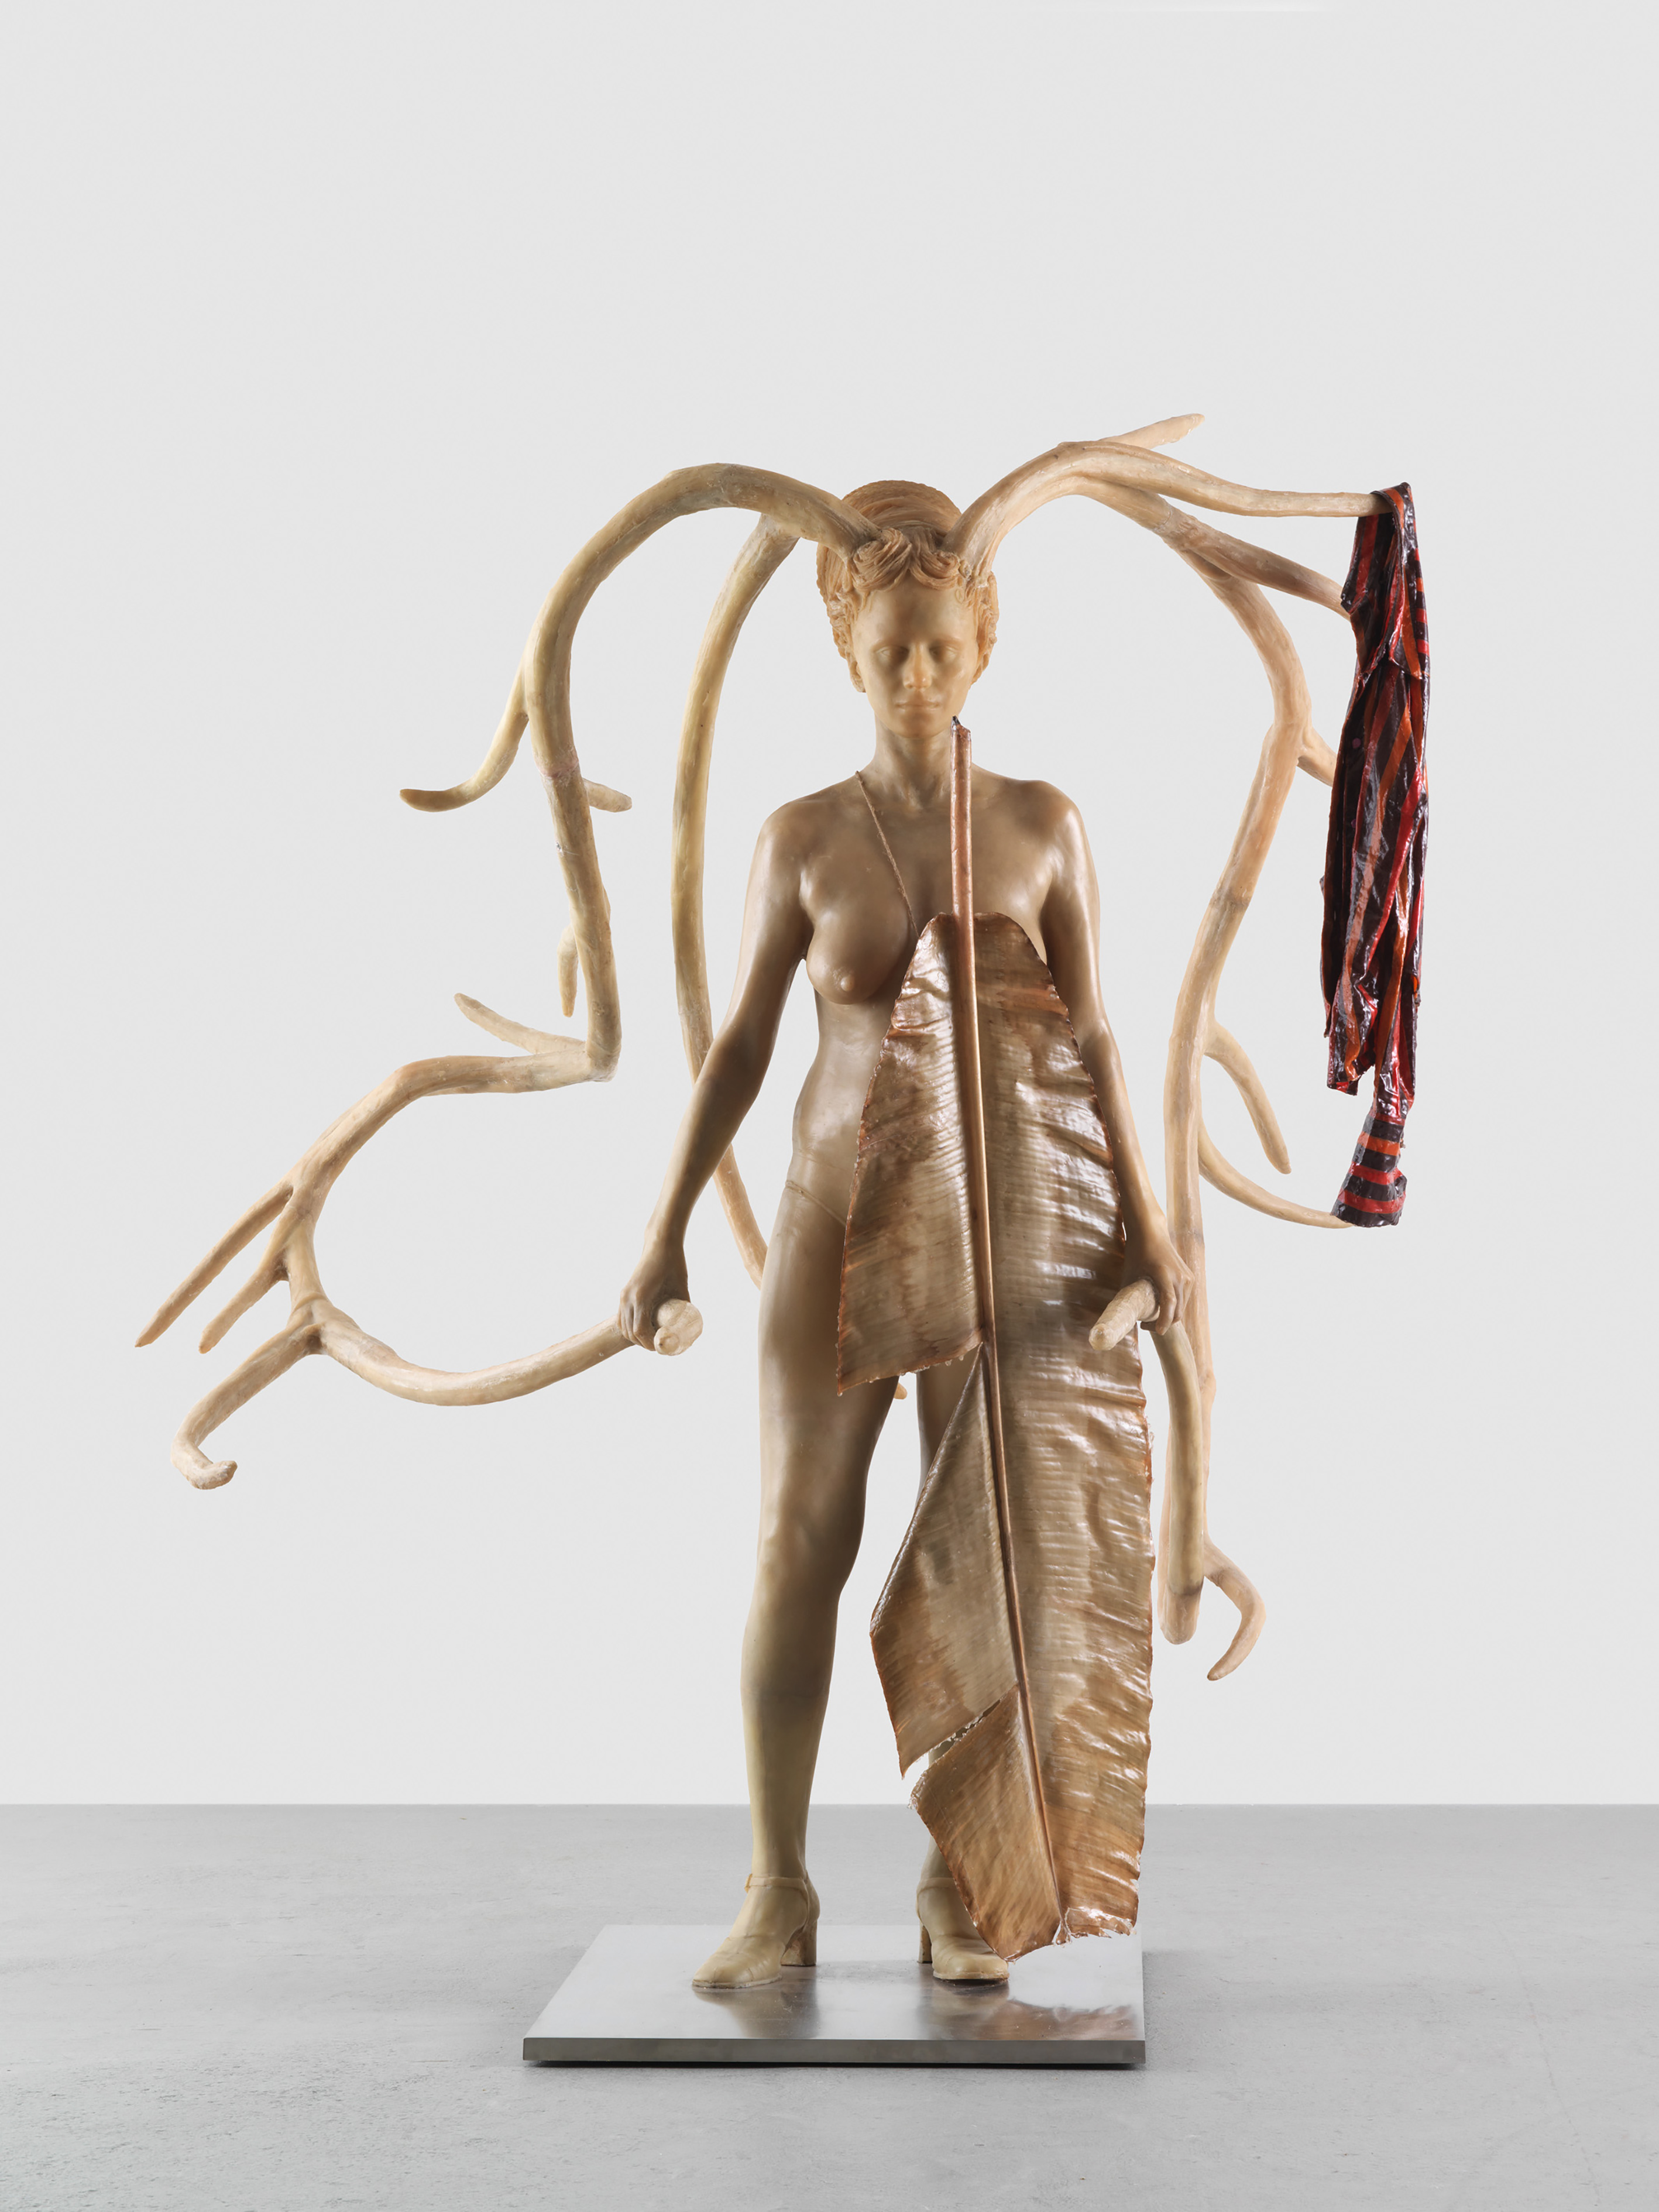 A white sculpture of a woman with extended antlers.